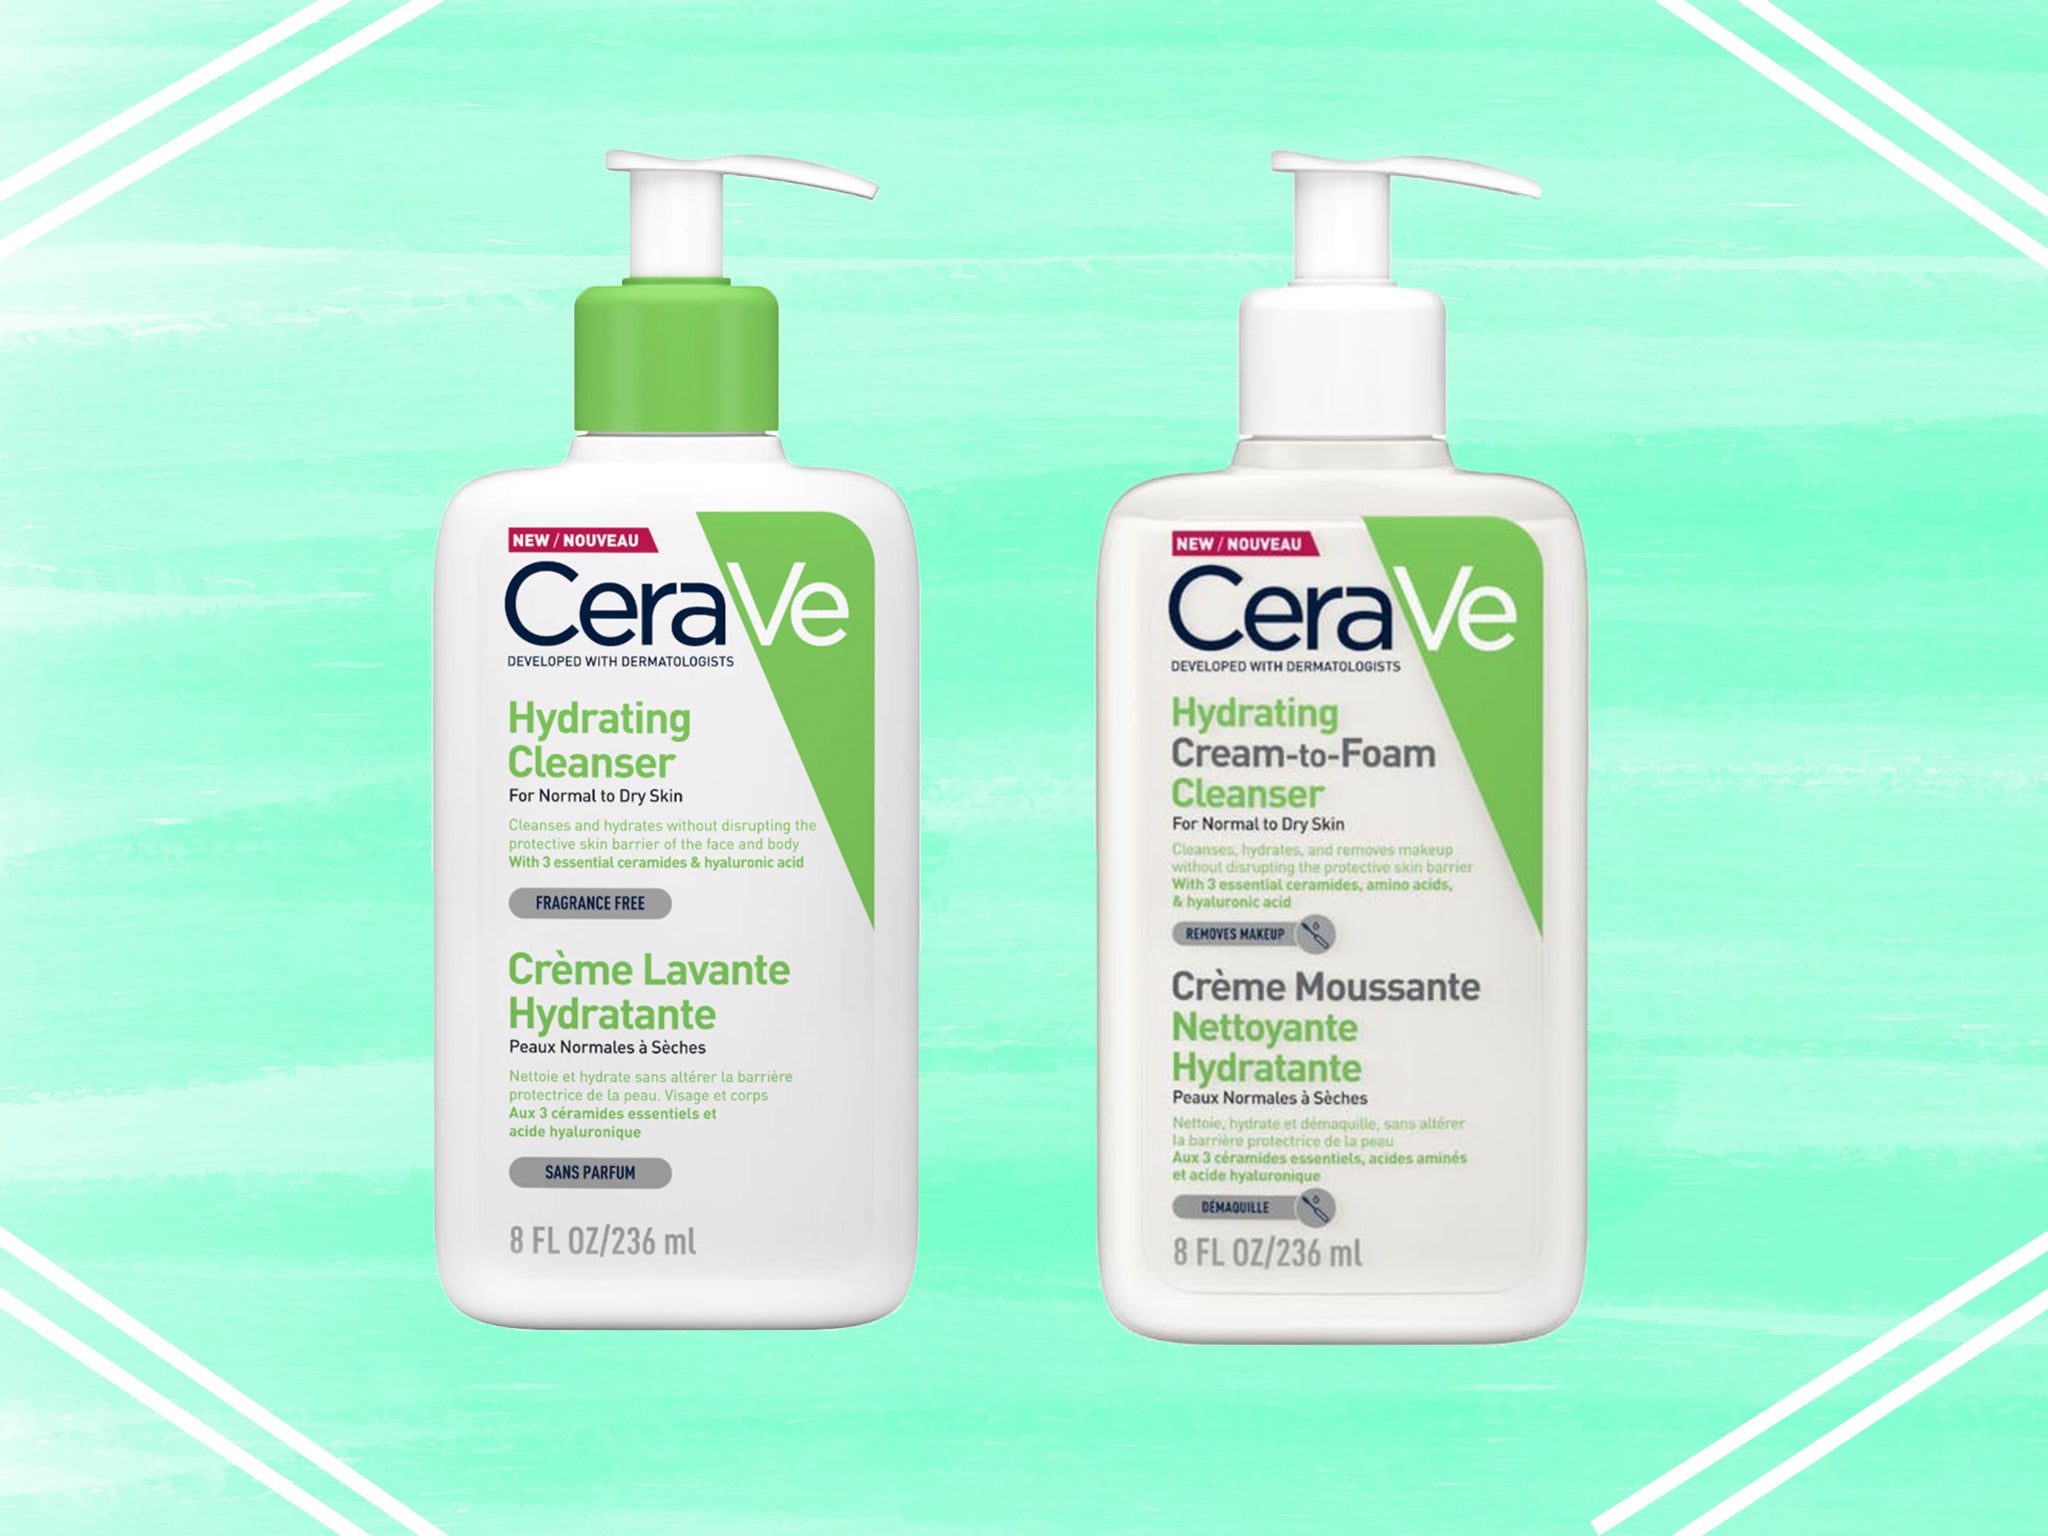 CeraVe cream to foam cleanser review: Is it as good as the original hydrating  cleanser?